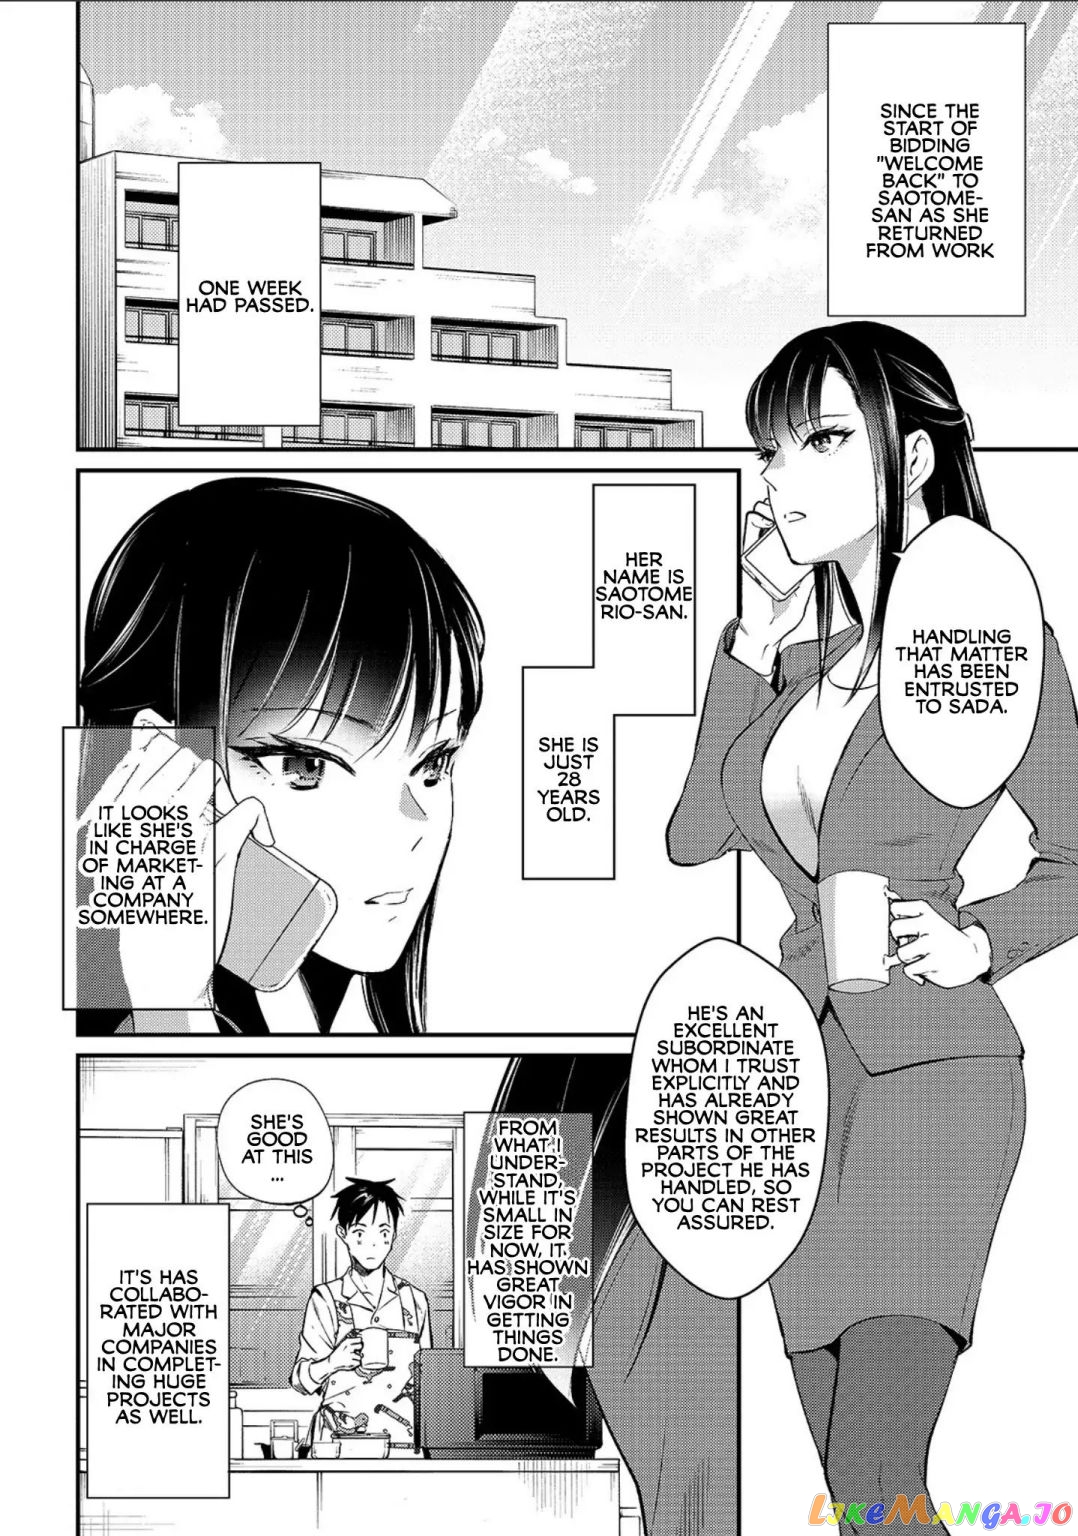 It's Fun Having a 300,000 yen a Month Job Welcoming Home an Onee-san Who Doesn't Find Meaning in a Job That Pays Her 500,000 yen a Month chapter 2 - page 2